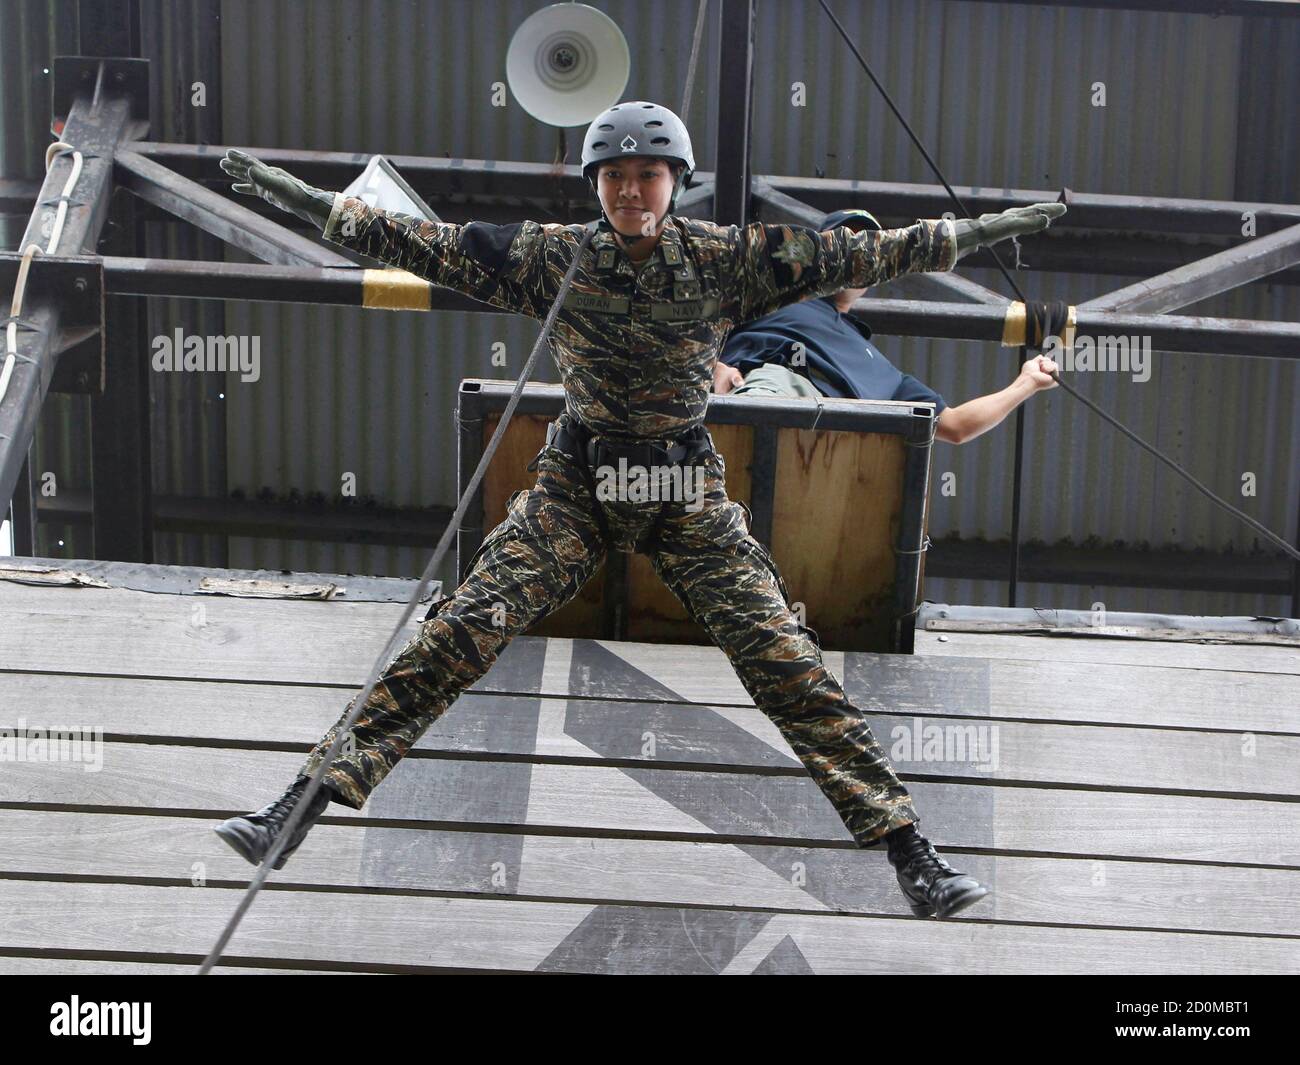 Lieutenant Junior Grade Michelle Duran, the first female airborne officer  of Naval Special Operations Group, demonstrates her rappel skills during a  drill inside the Philippine Navy headquarters in Sangley Point, Ternate  town,